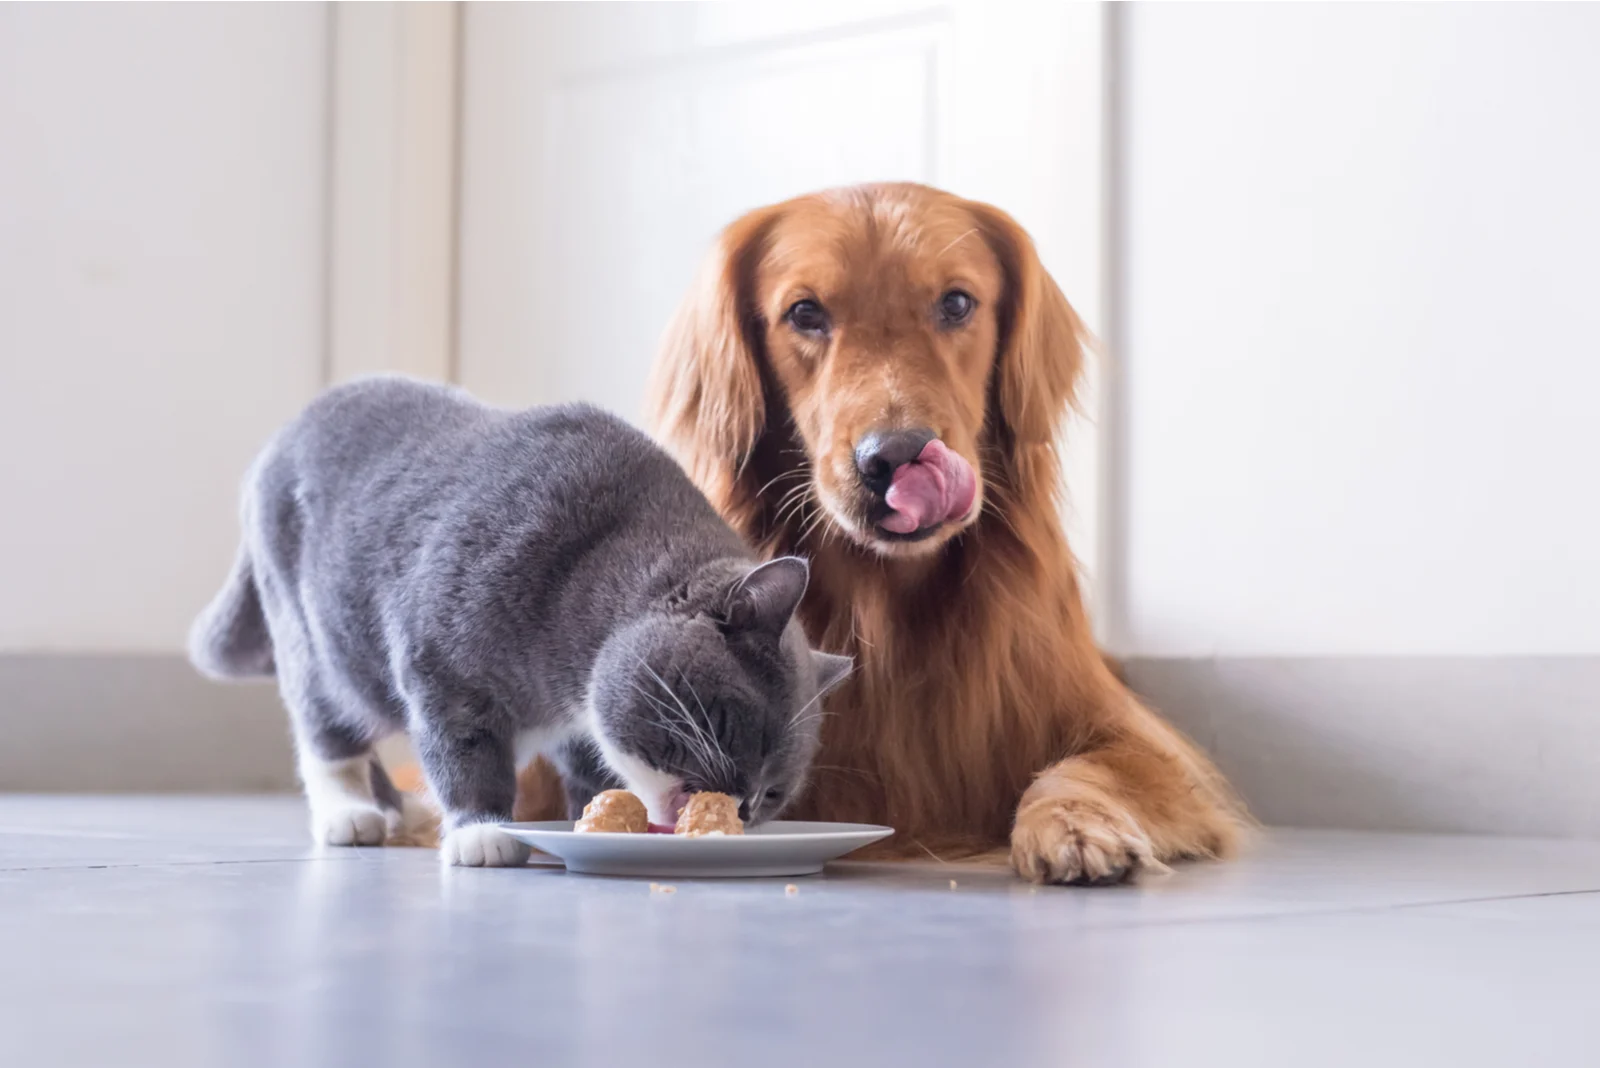 cat eating food with dog next to her